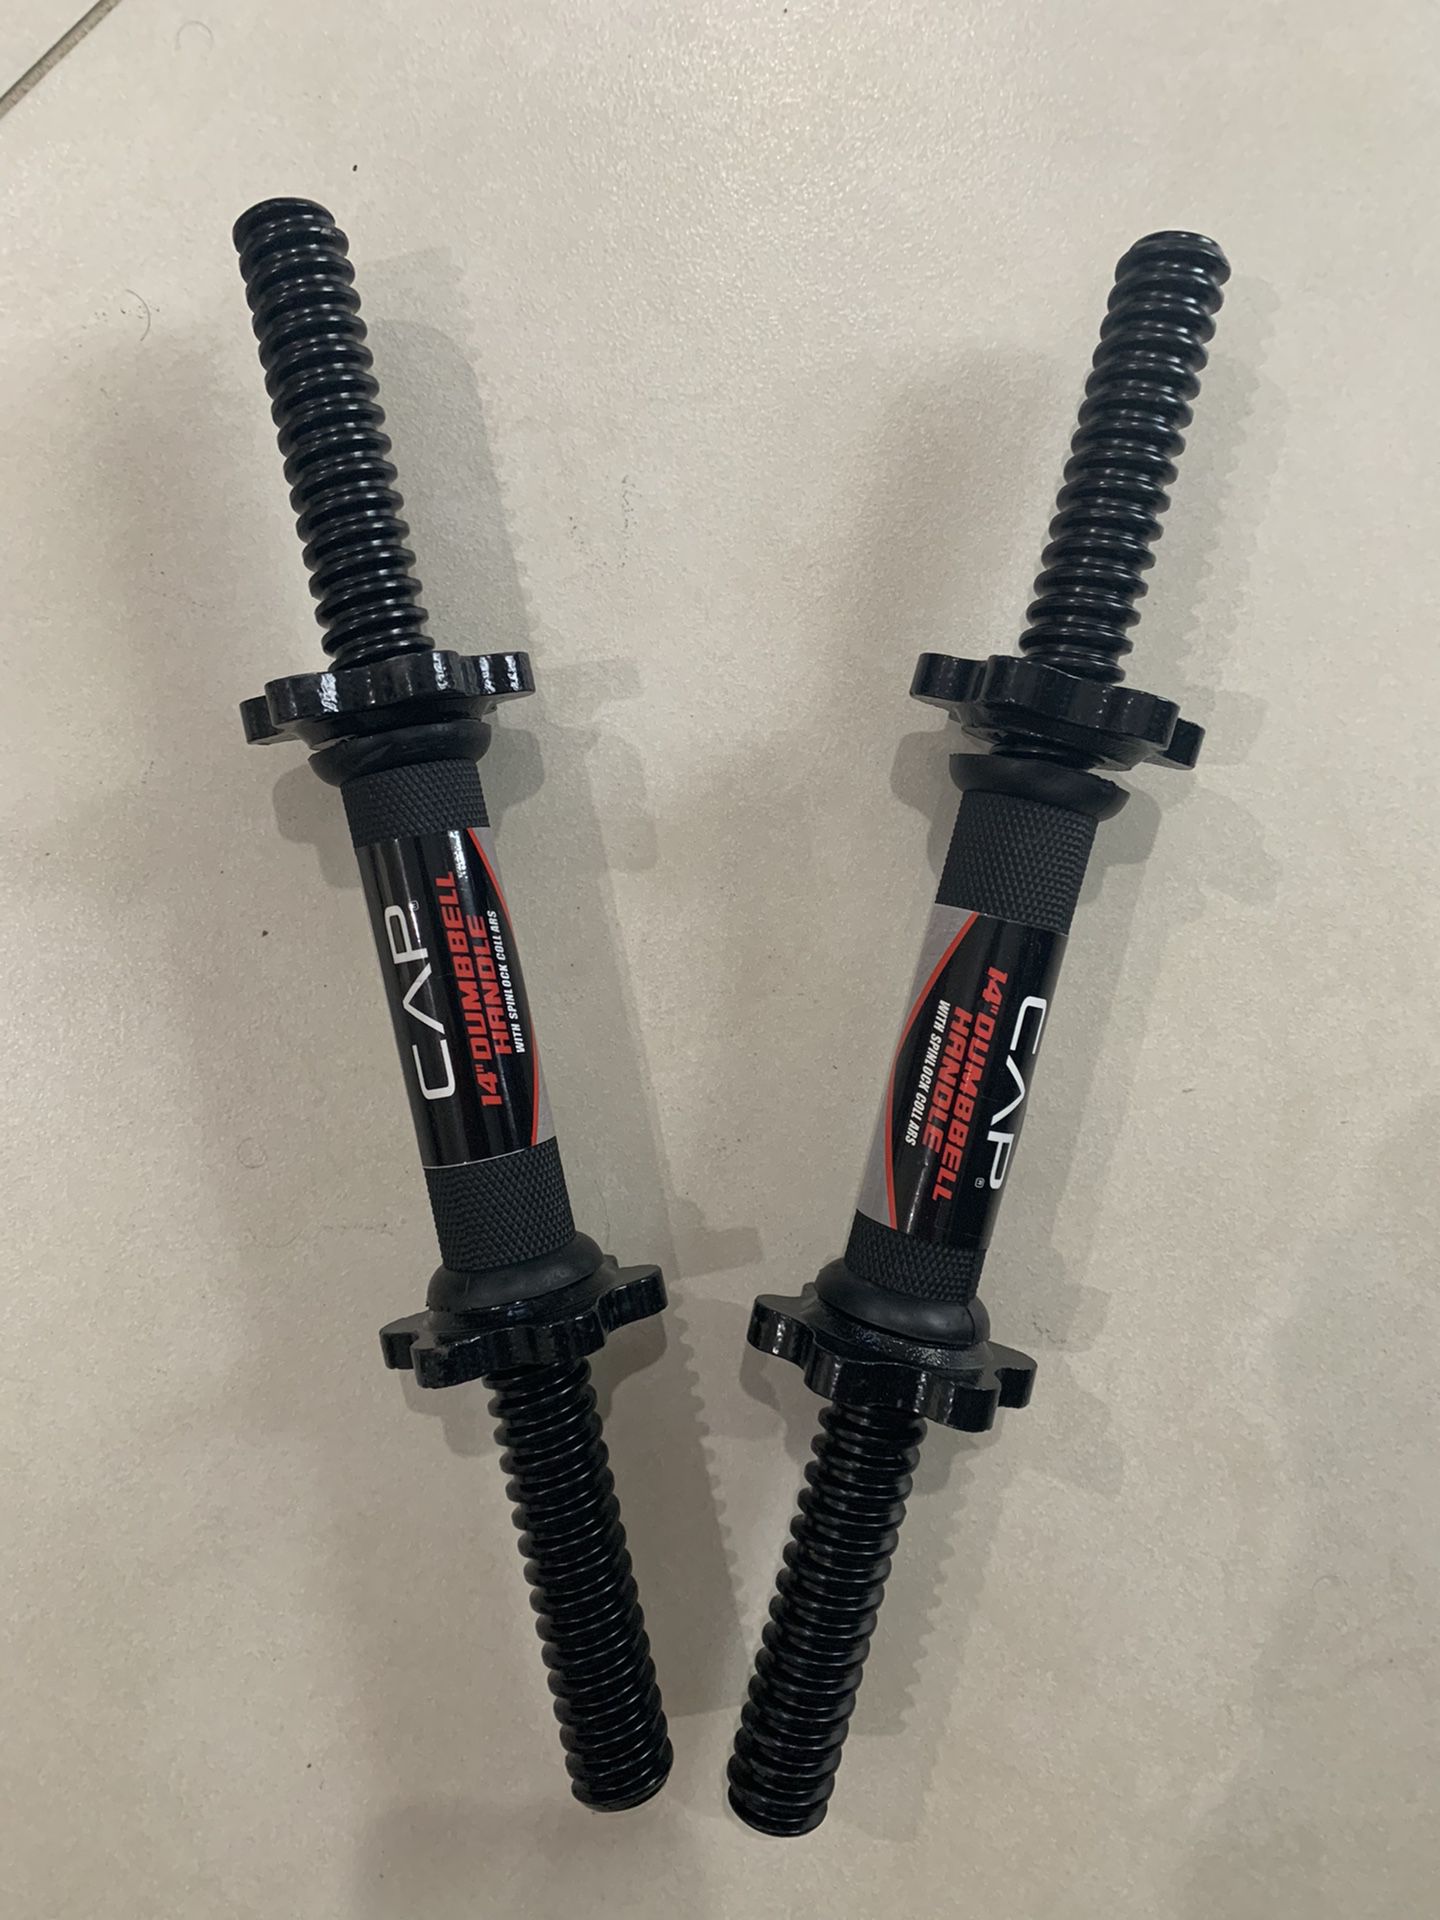 New pair of 14” Dumbbell Handles for standard 1” weight plates